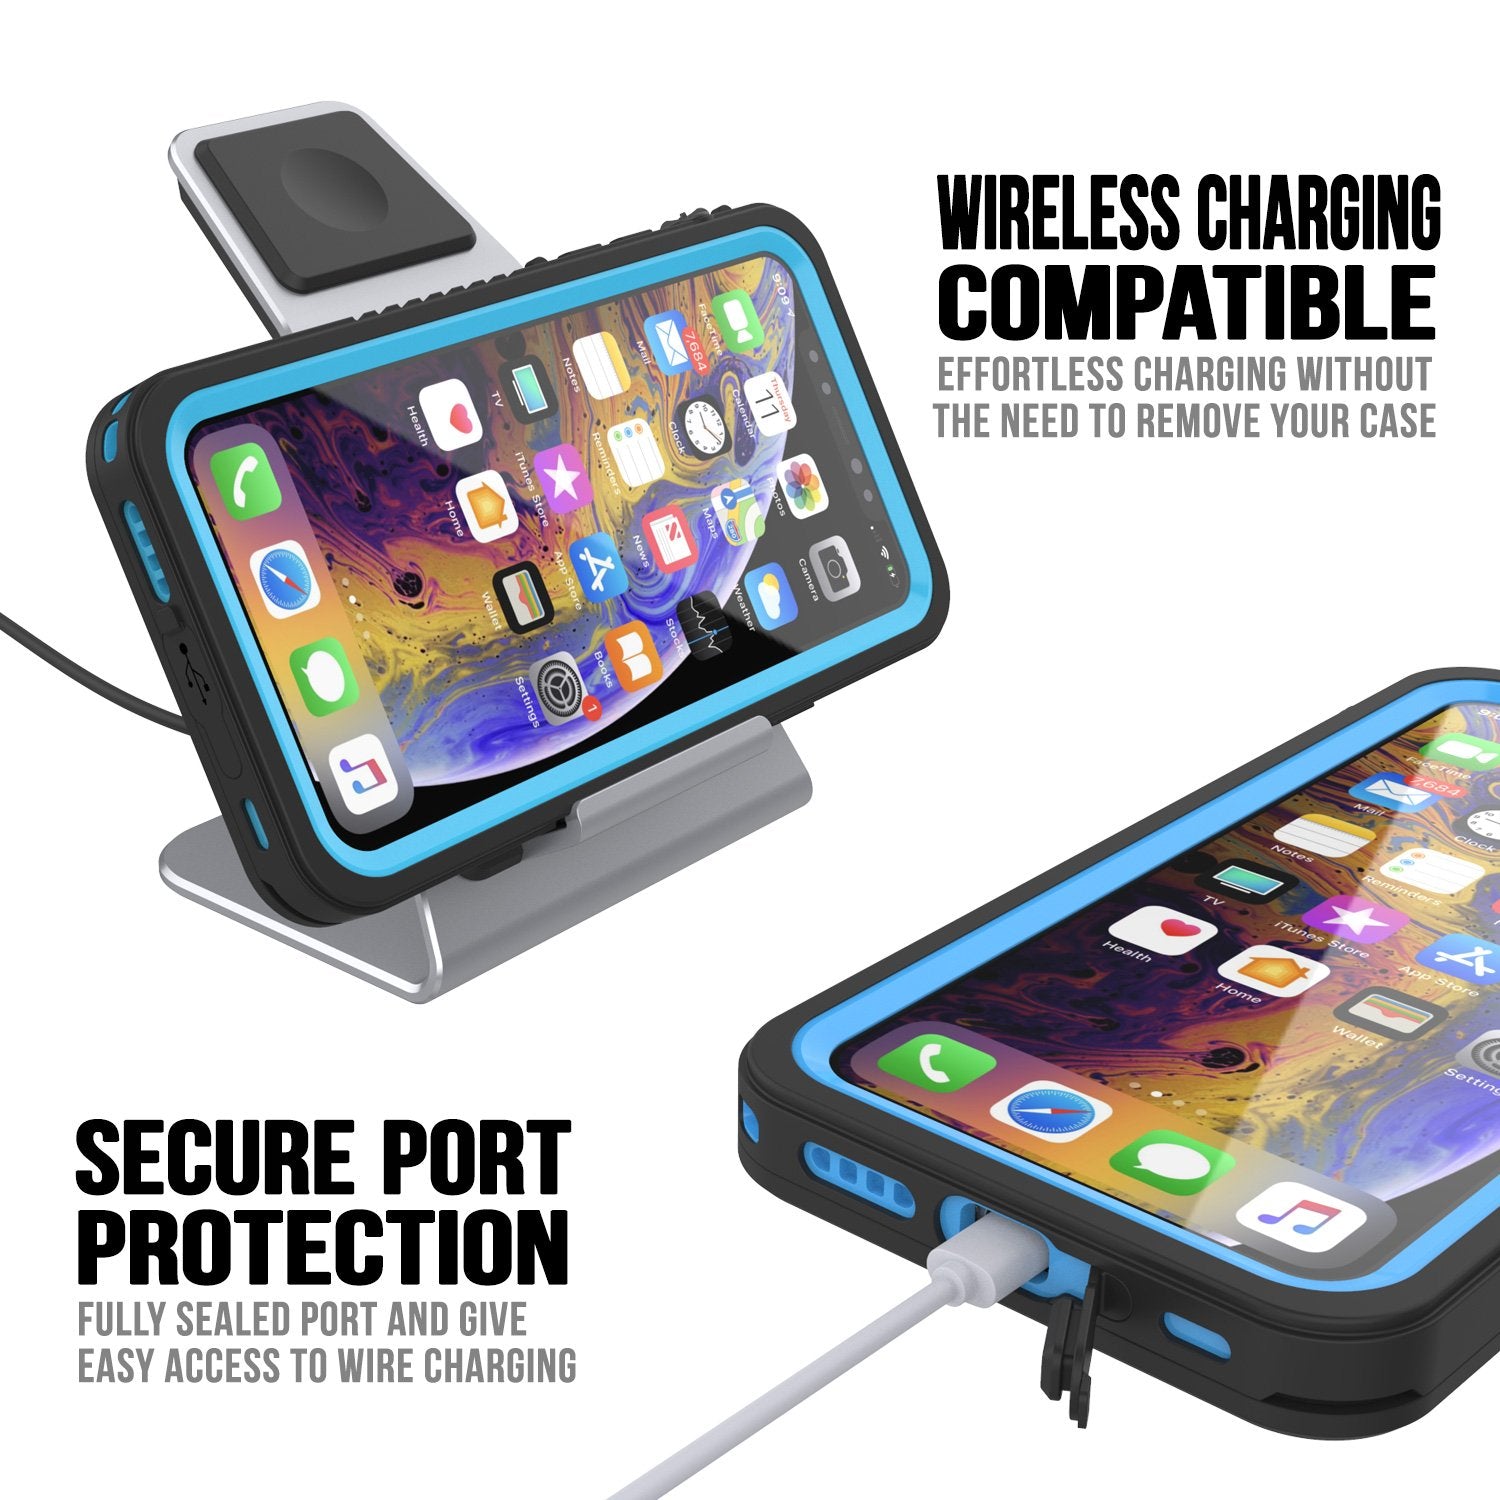 iPhone 11 Waterproof Case, Punkcase [Extreme Series] Armor Cover W/ Built In Screen Protector [Light Blue]